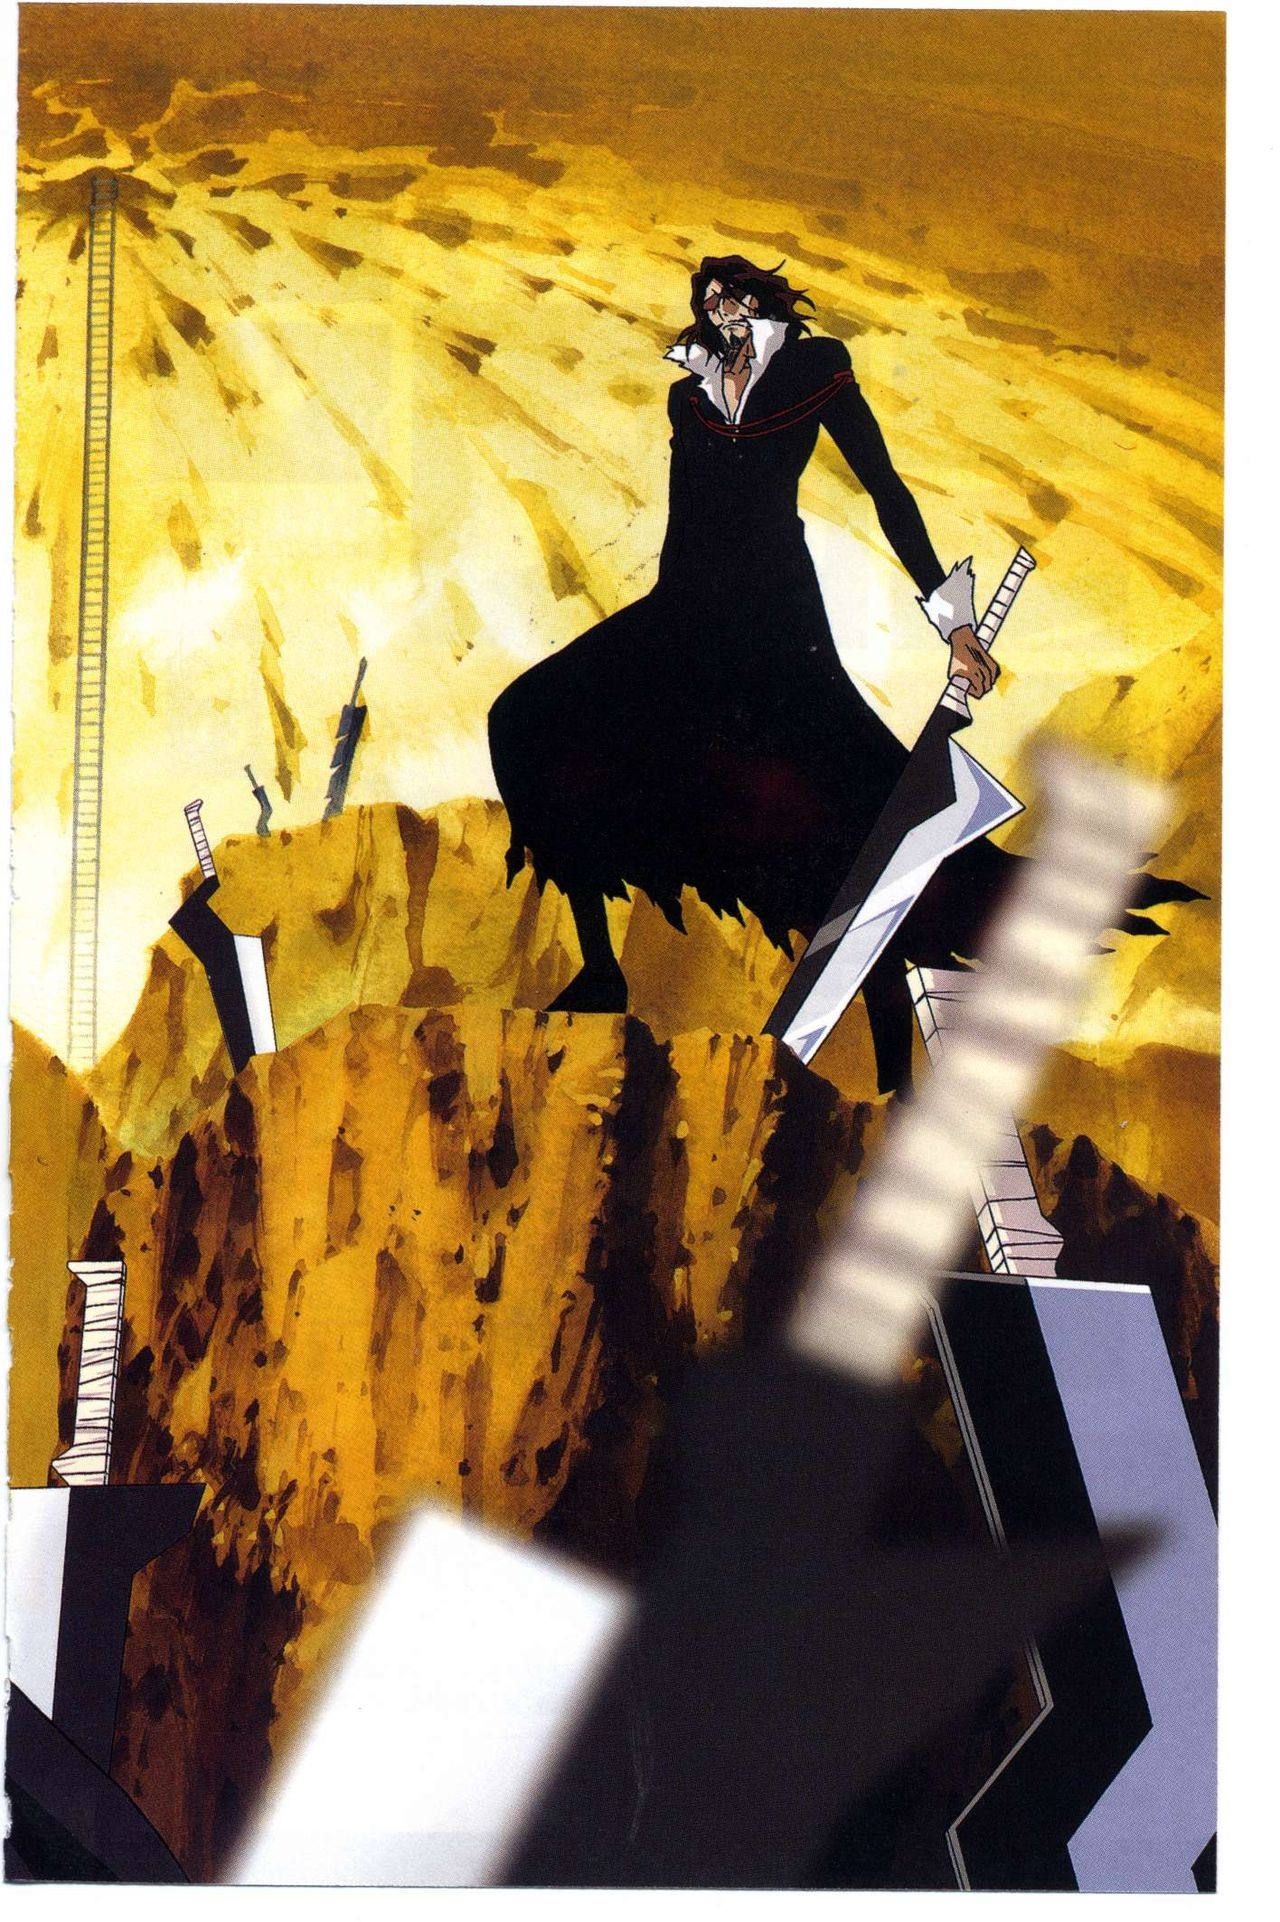 Bleach: Official Animation Book VIBEs 130